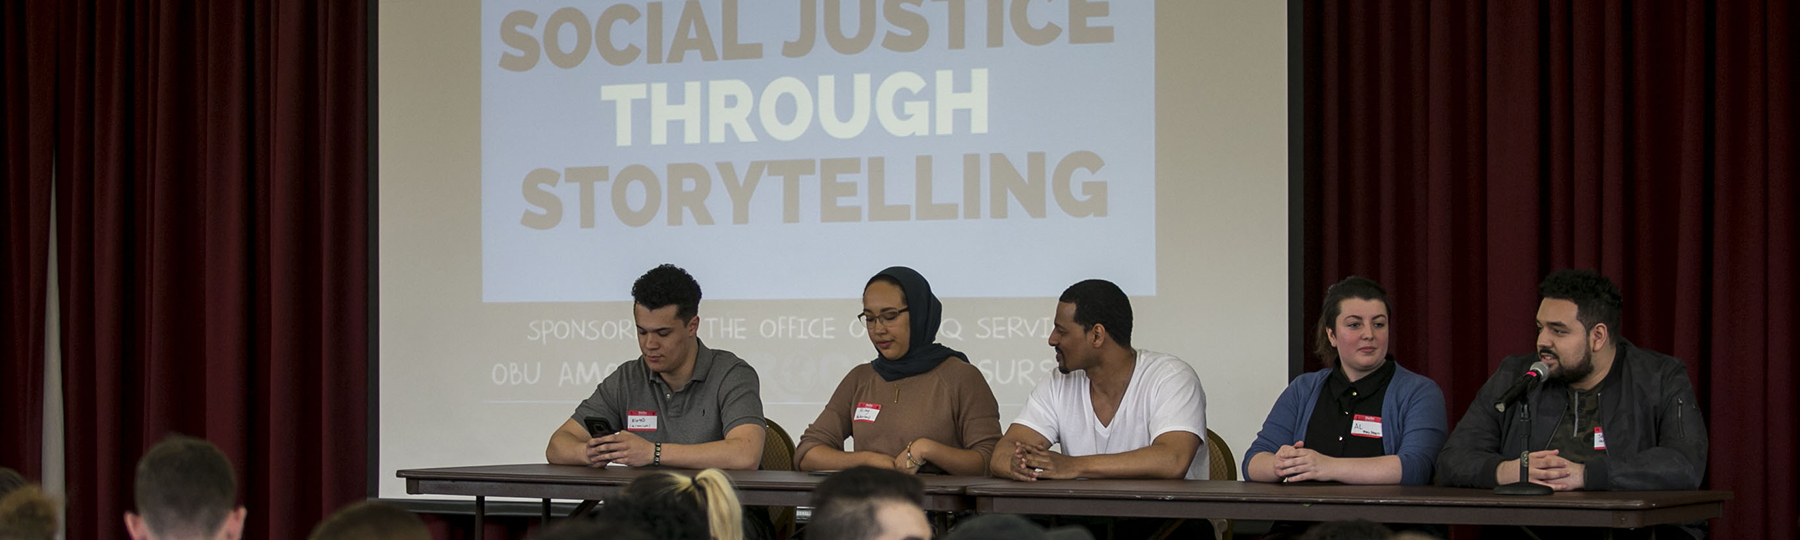 Five panelists are seated at a table in front of a screen that states Social Justice Through Storytelling.